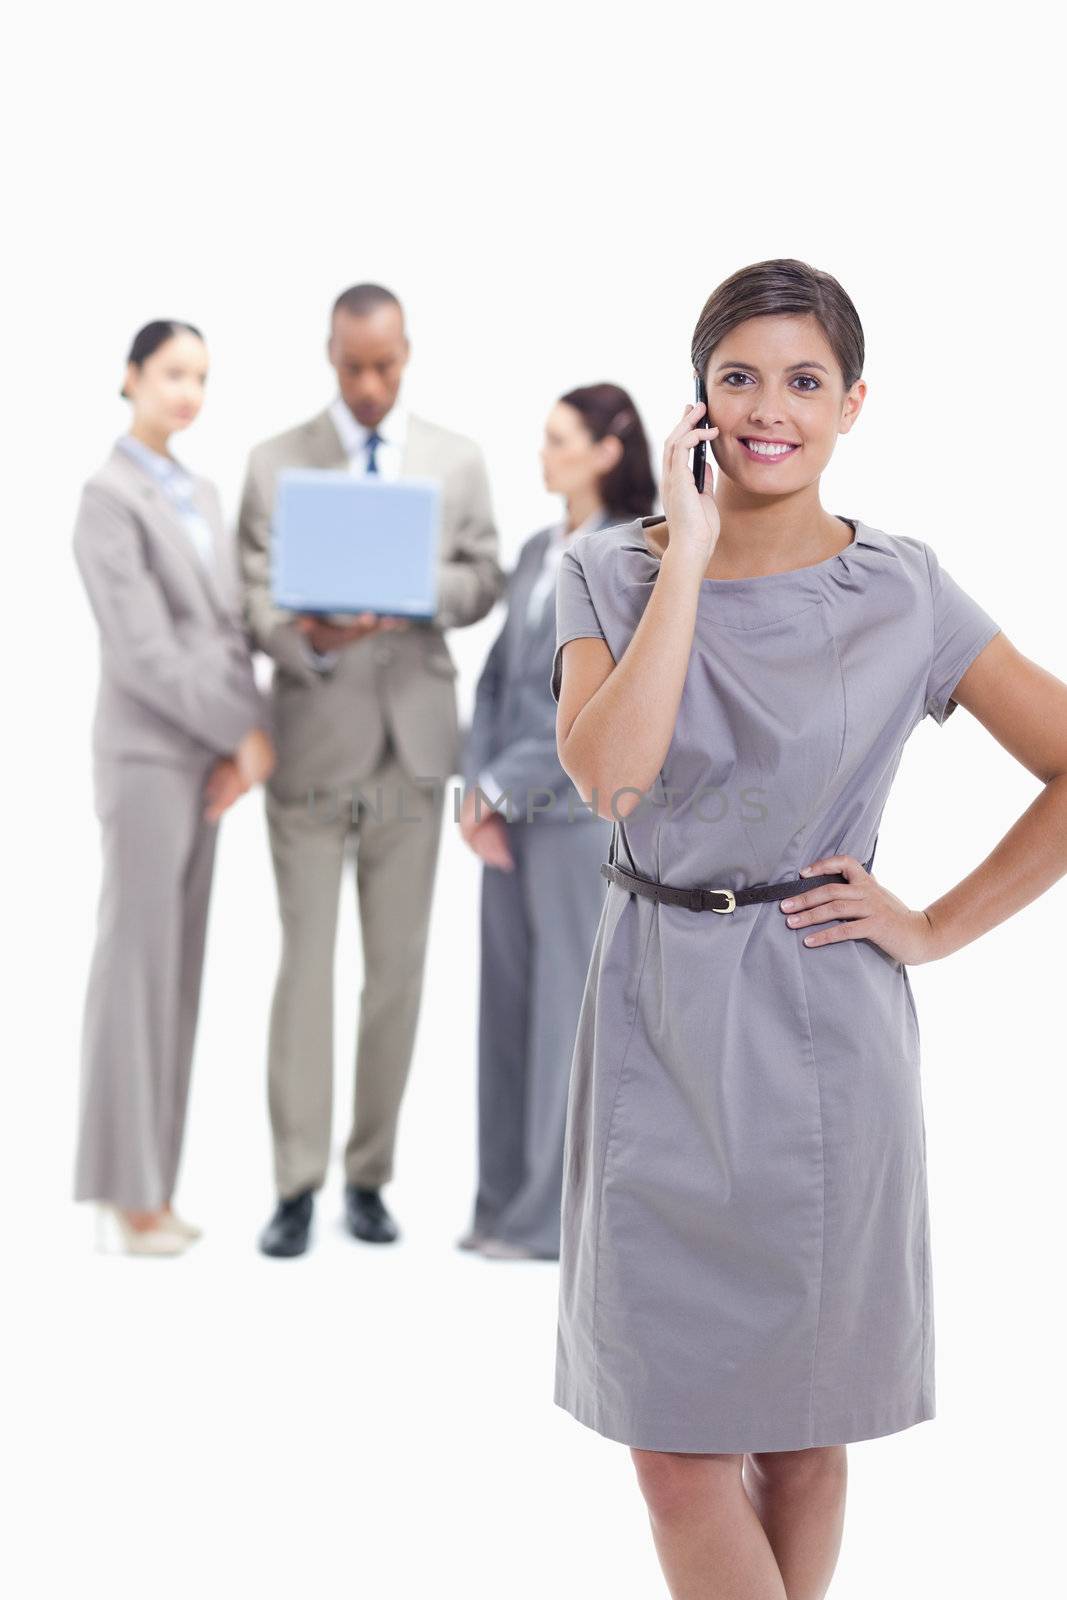 Businesswoman on the phone with a hand on her hip and crossing her legs, with co-workers in the background with a laptop